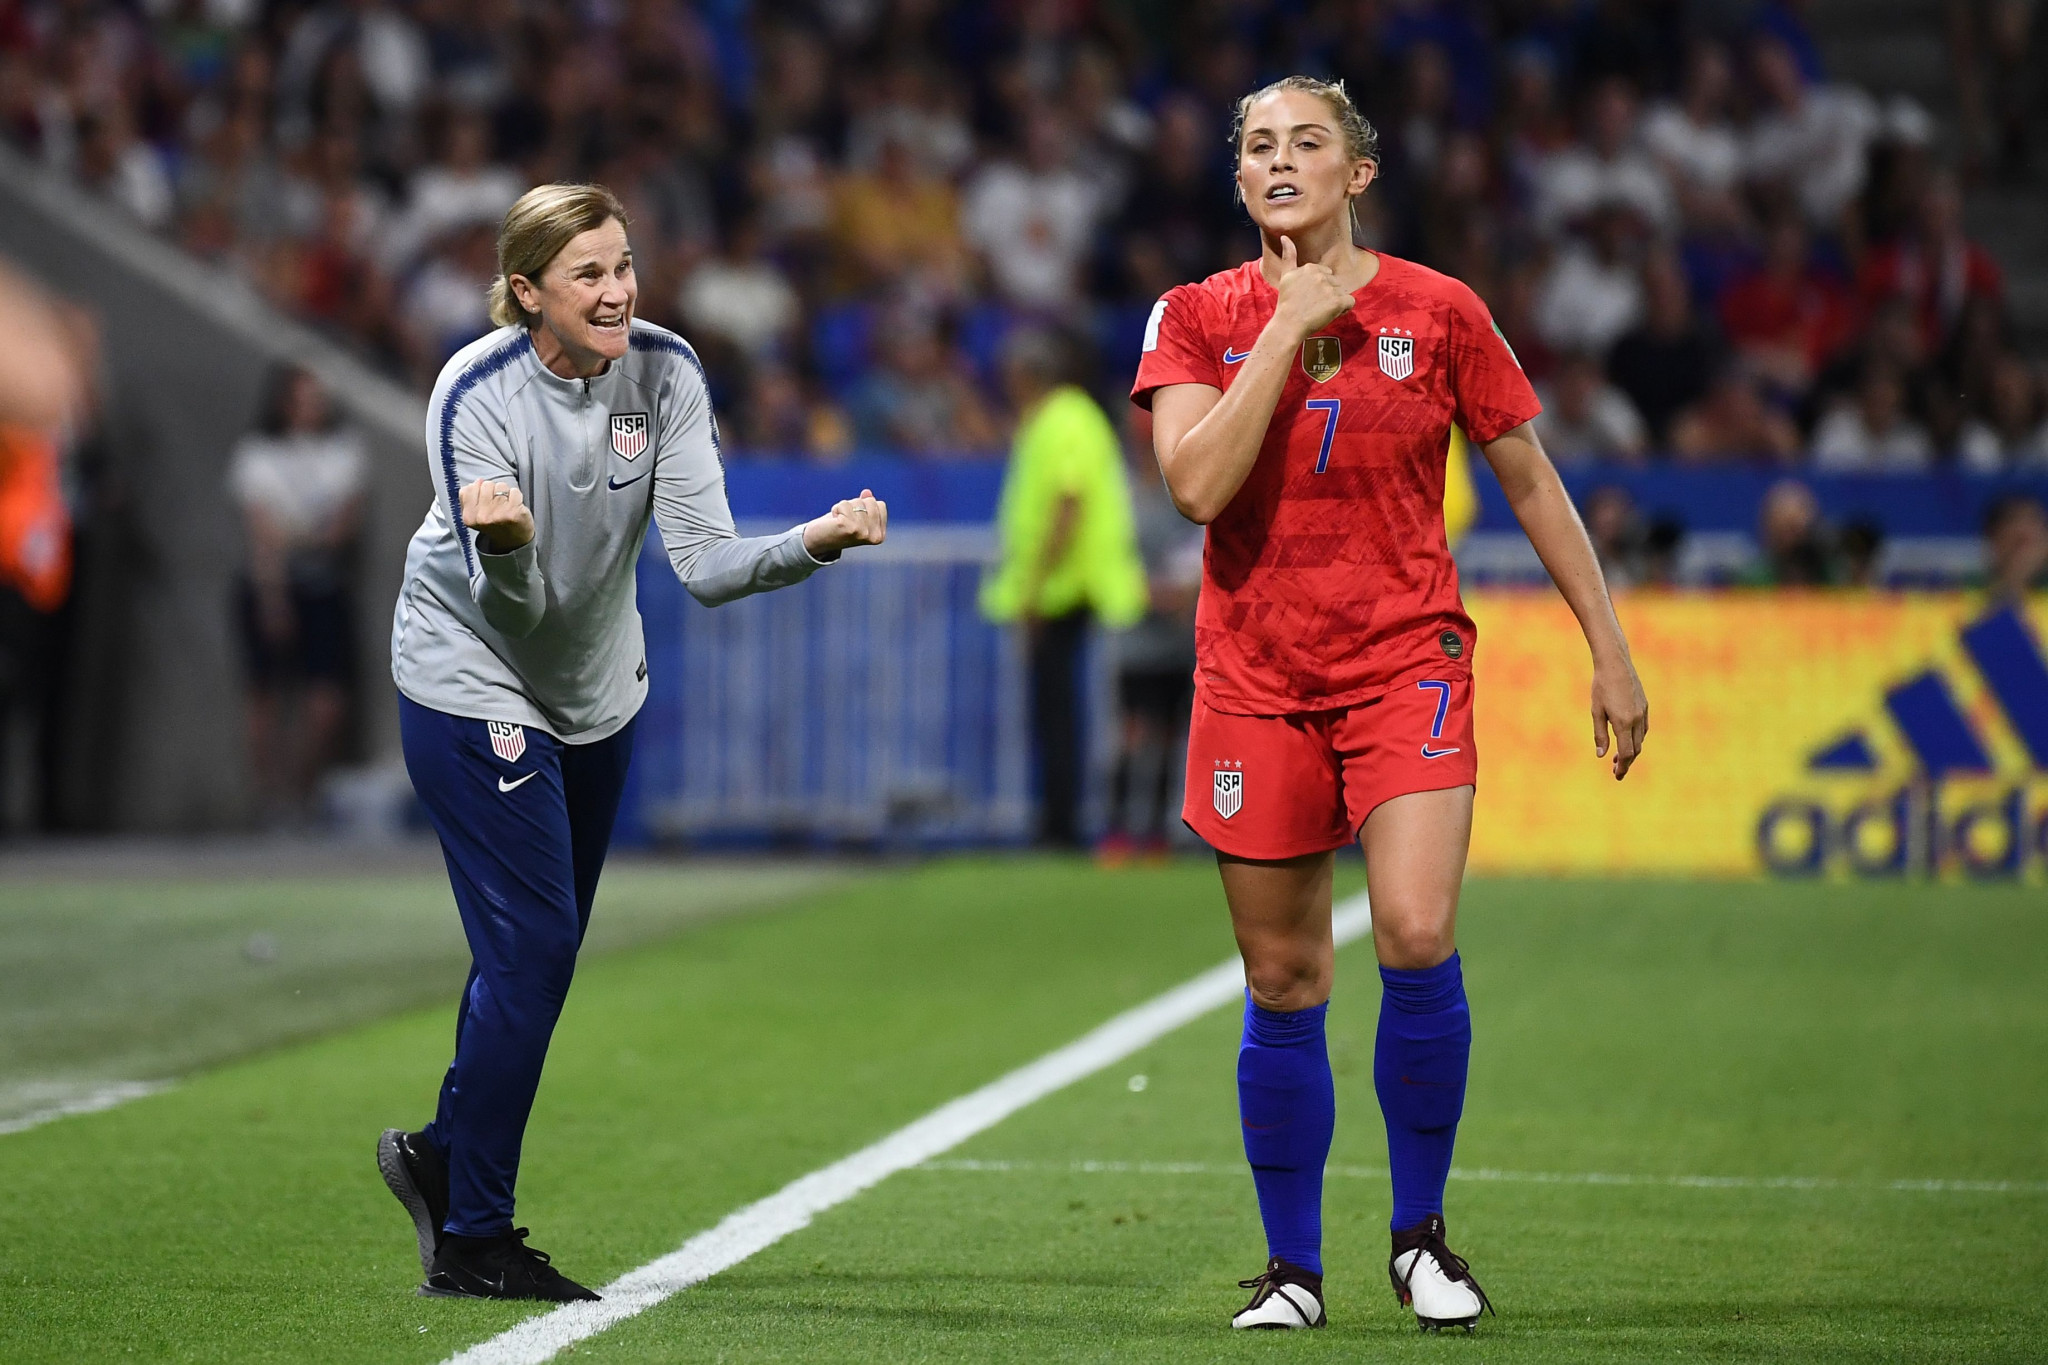 United States' success has led to their women's team being viewed, perhaps unfairly, as the villains of the Women's World Cup ©Getty Images